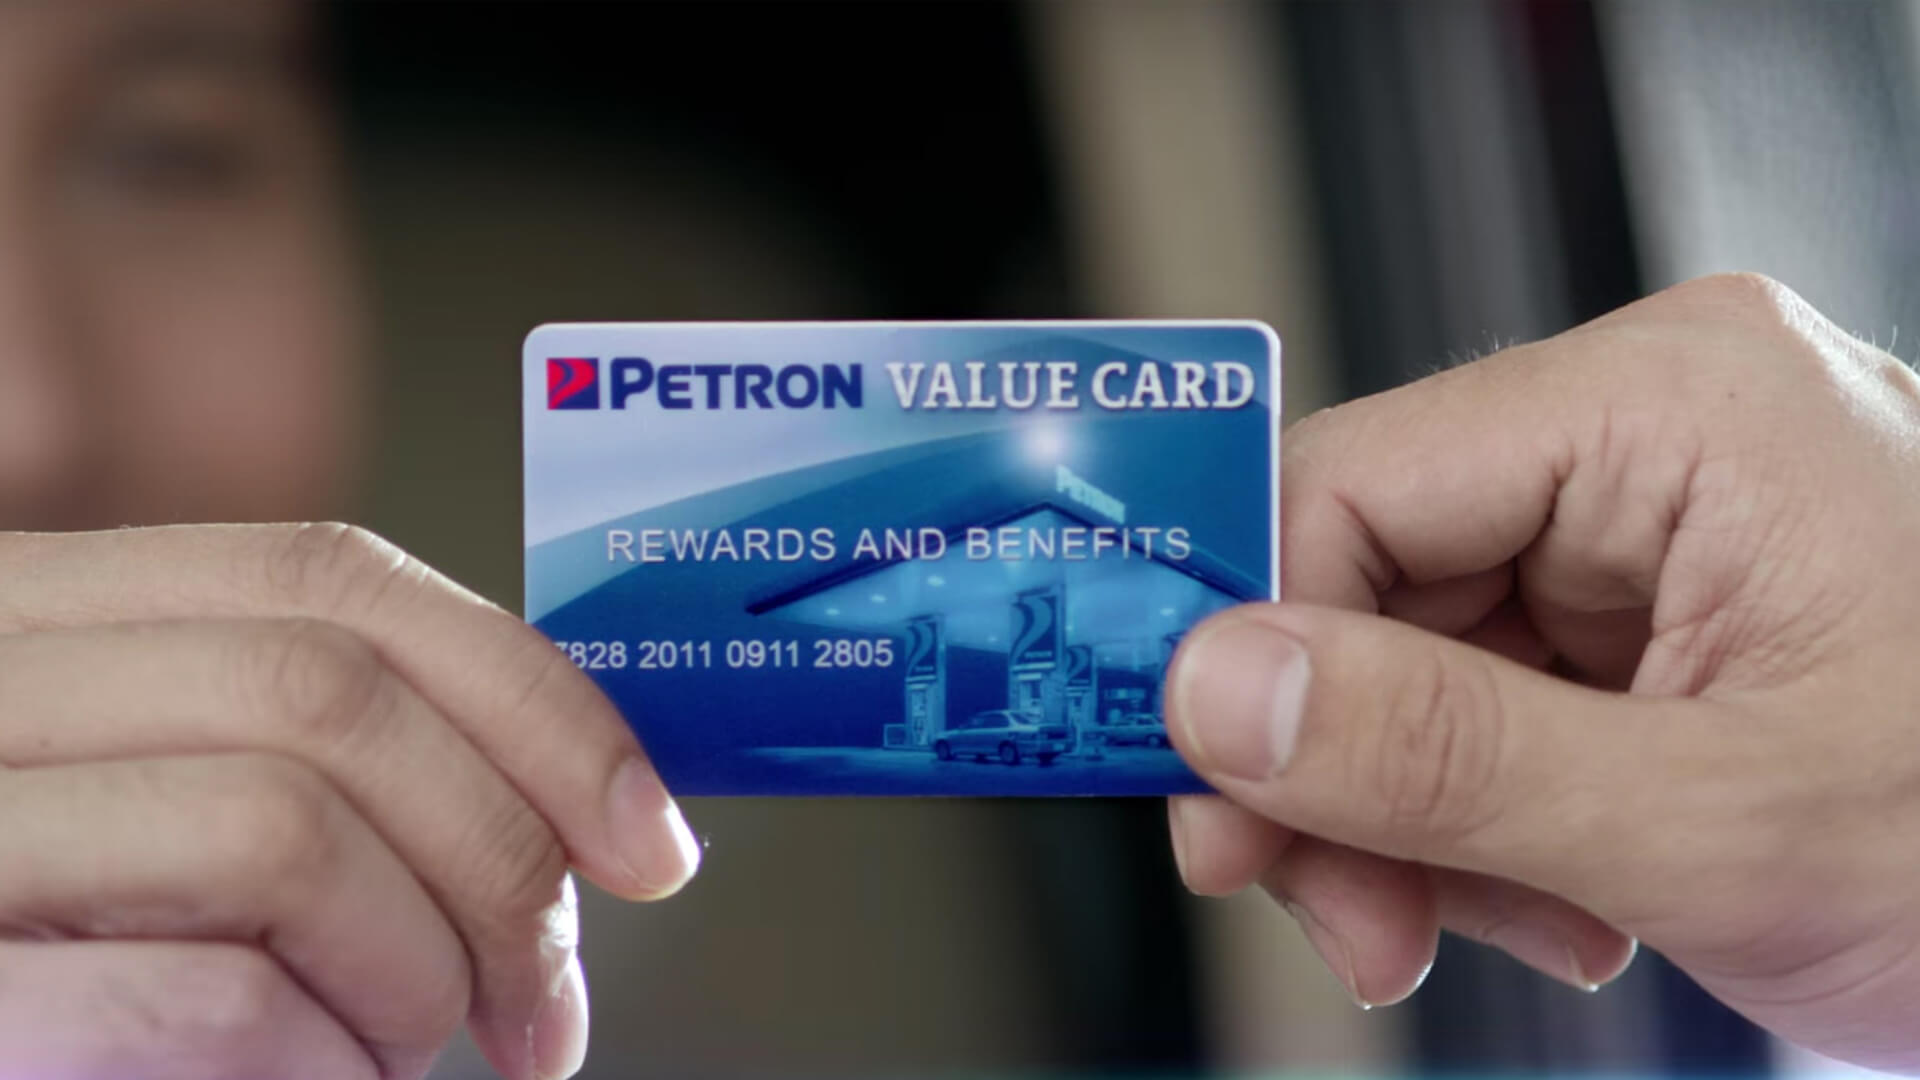 Petron Value Card: Get Your Rewards Today